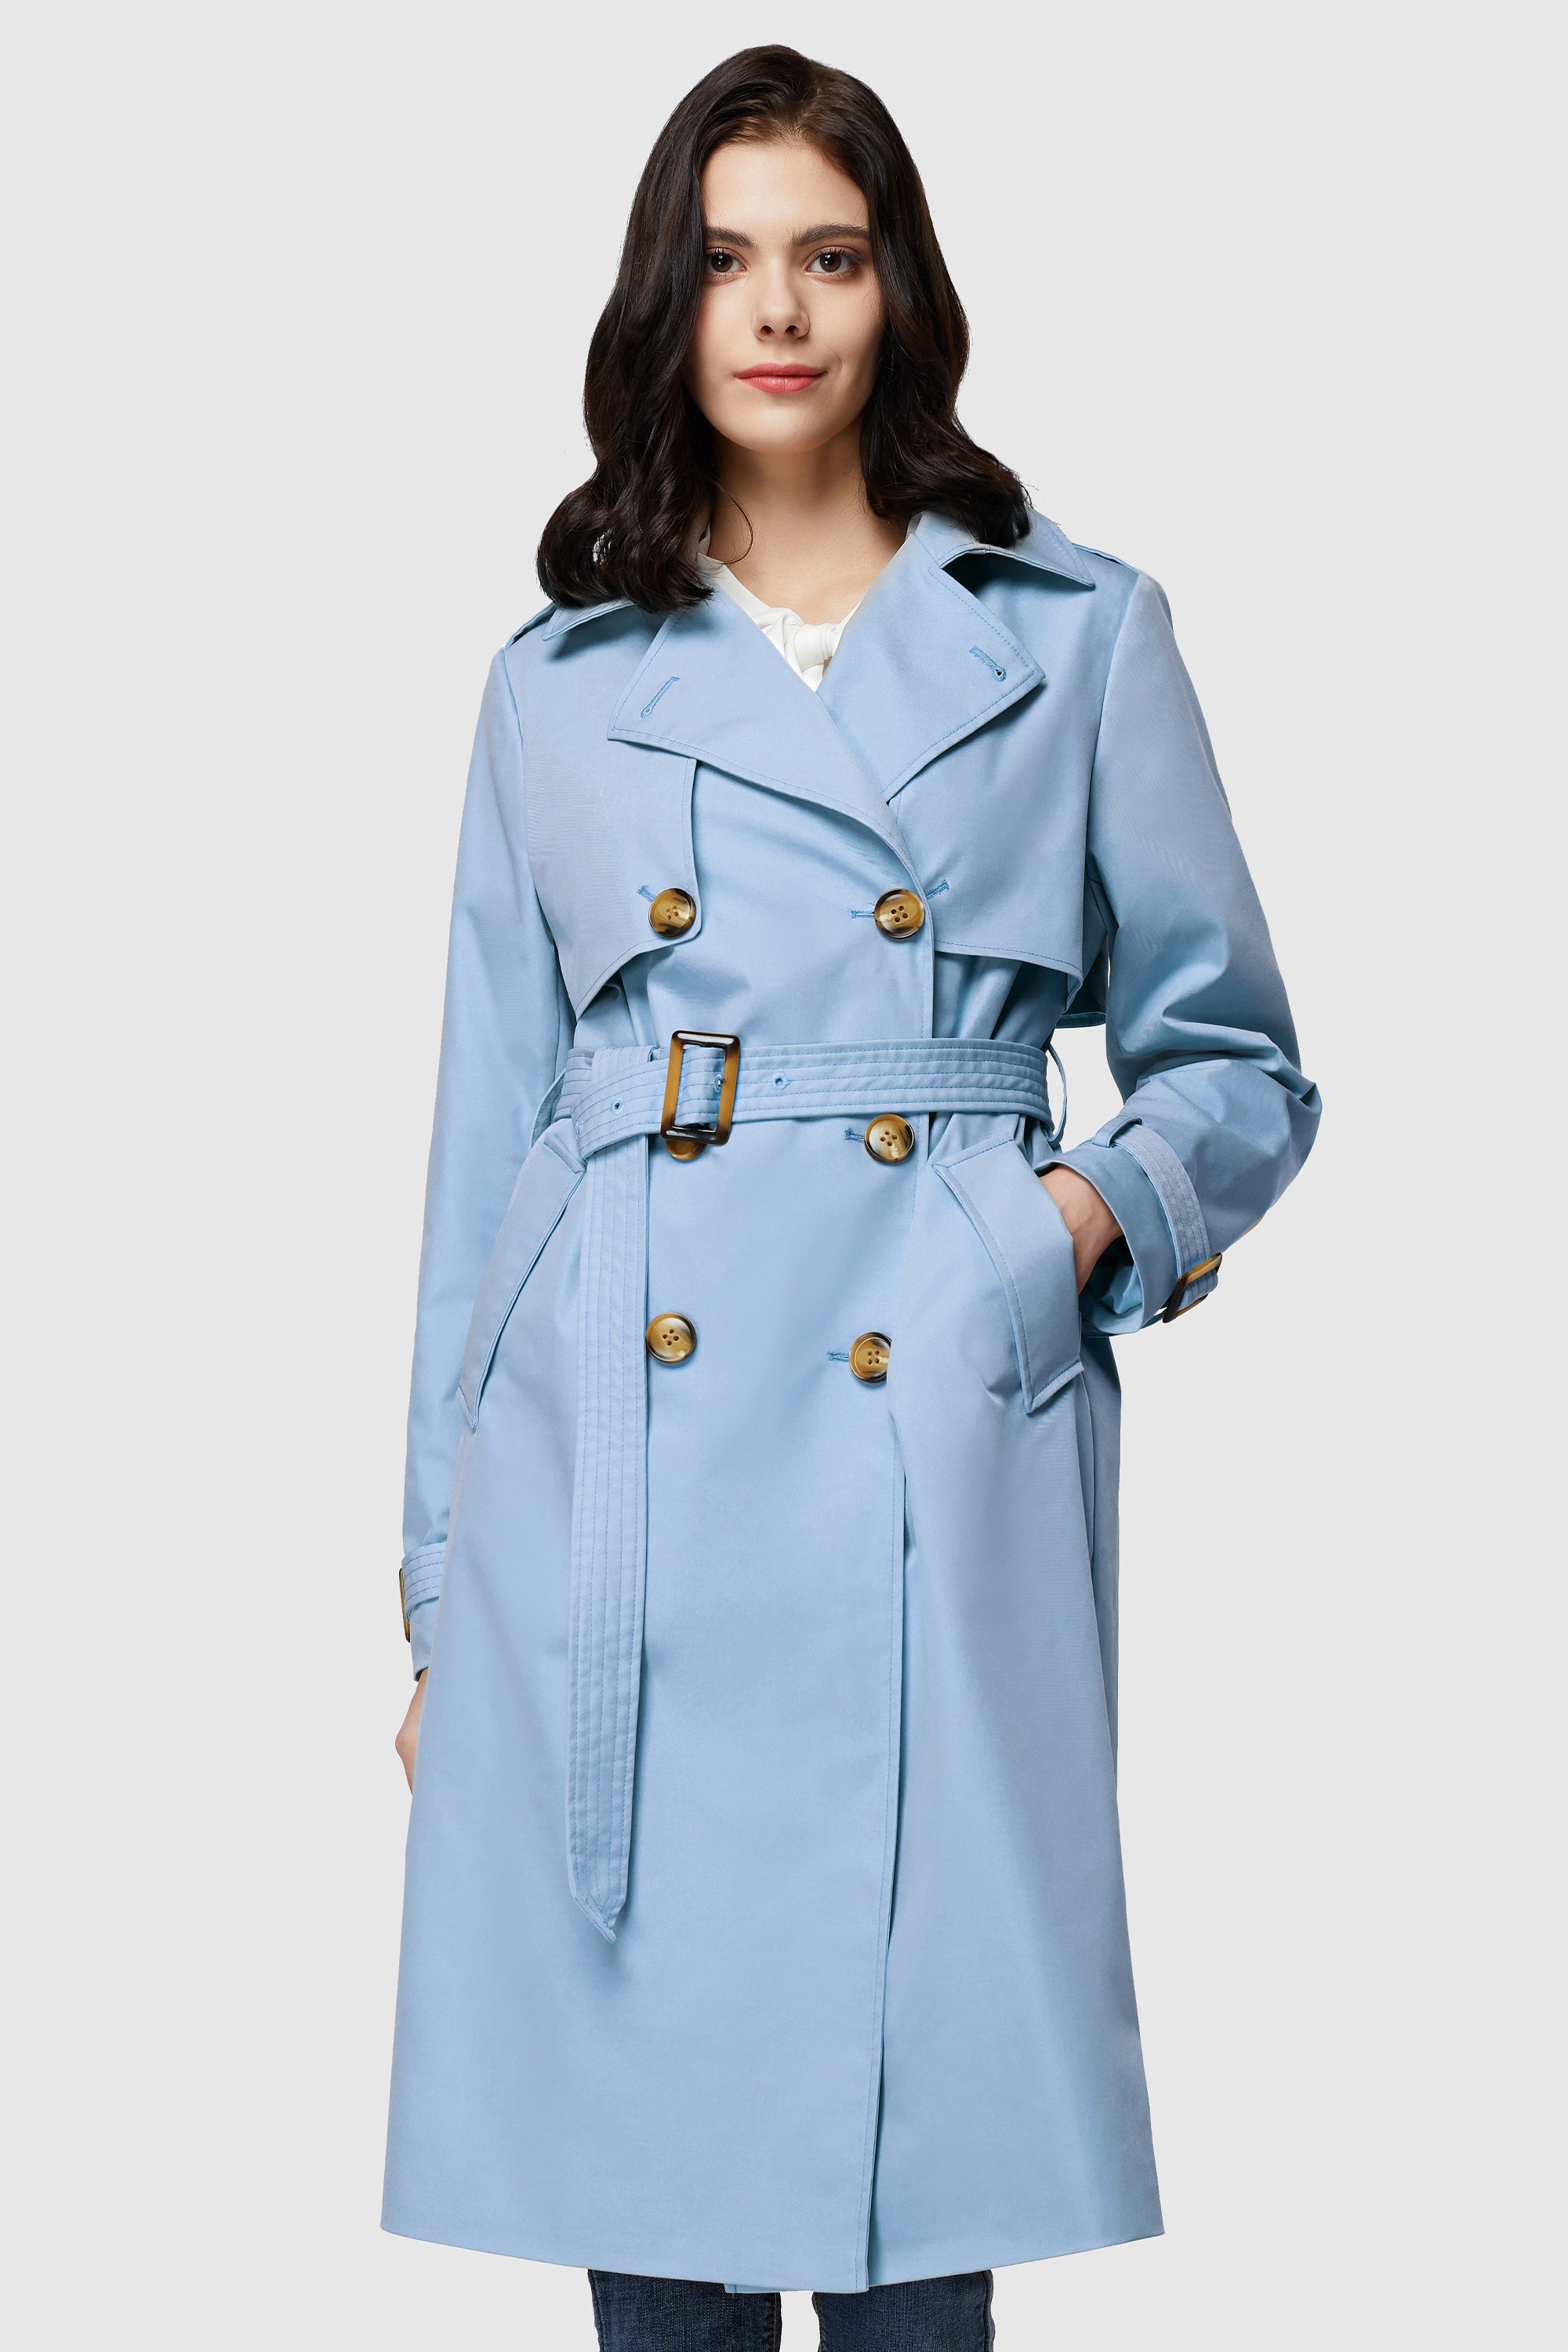 Orolay Women's 3/4 Length Belted Double-Breasted Trench Coat